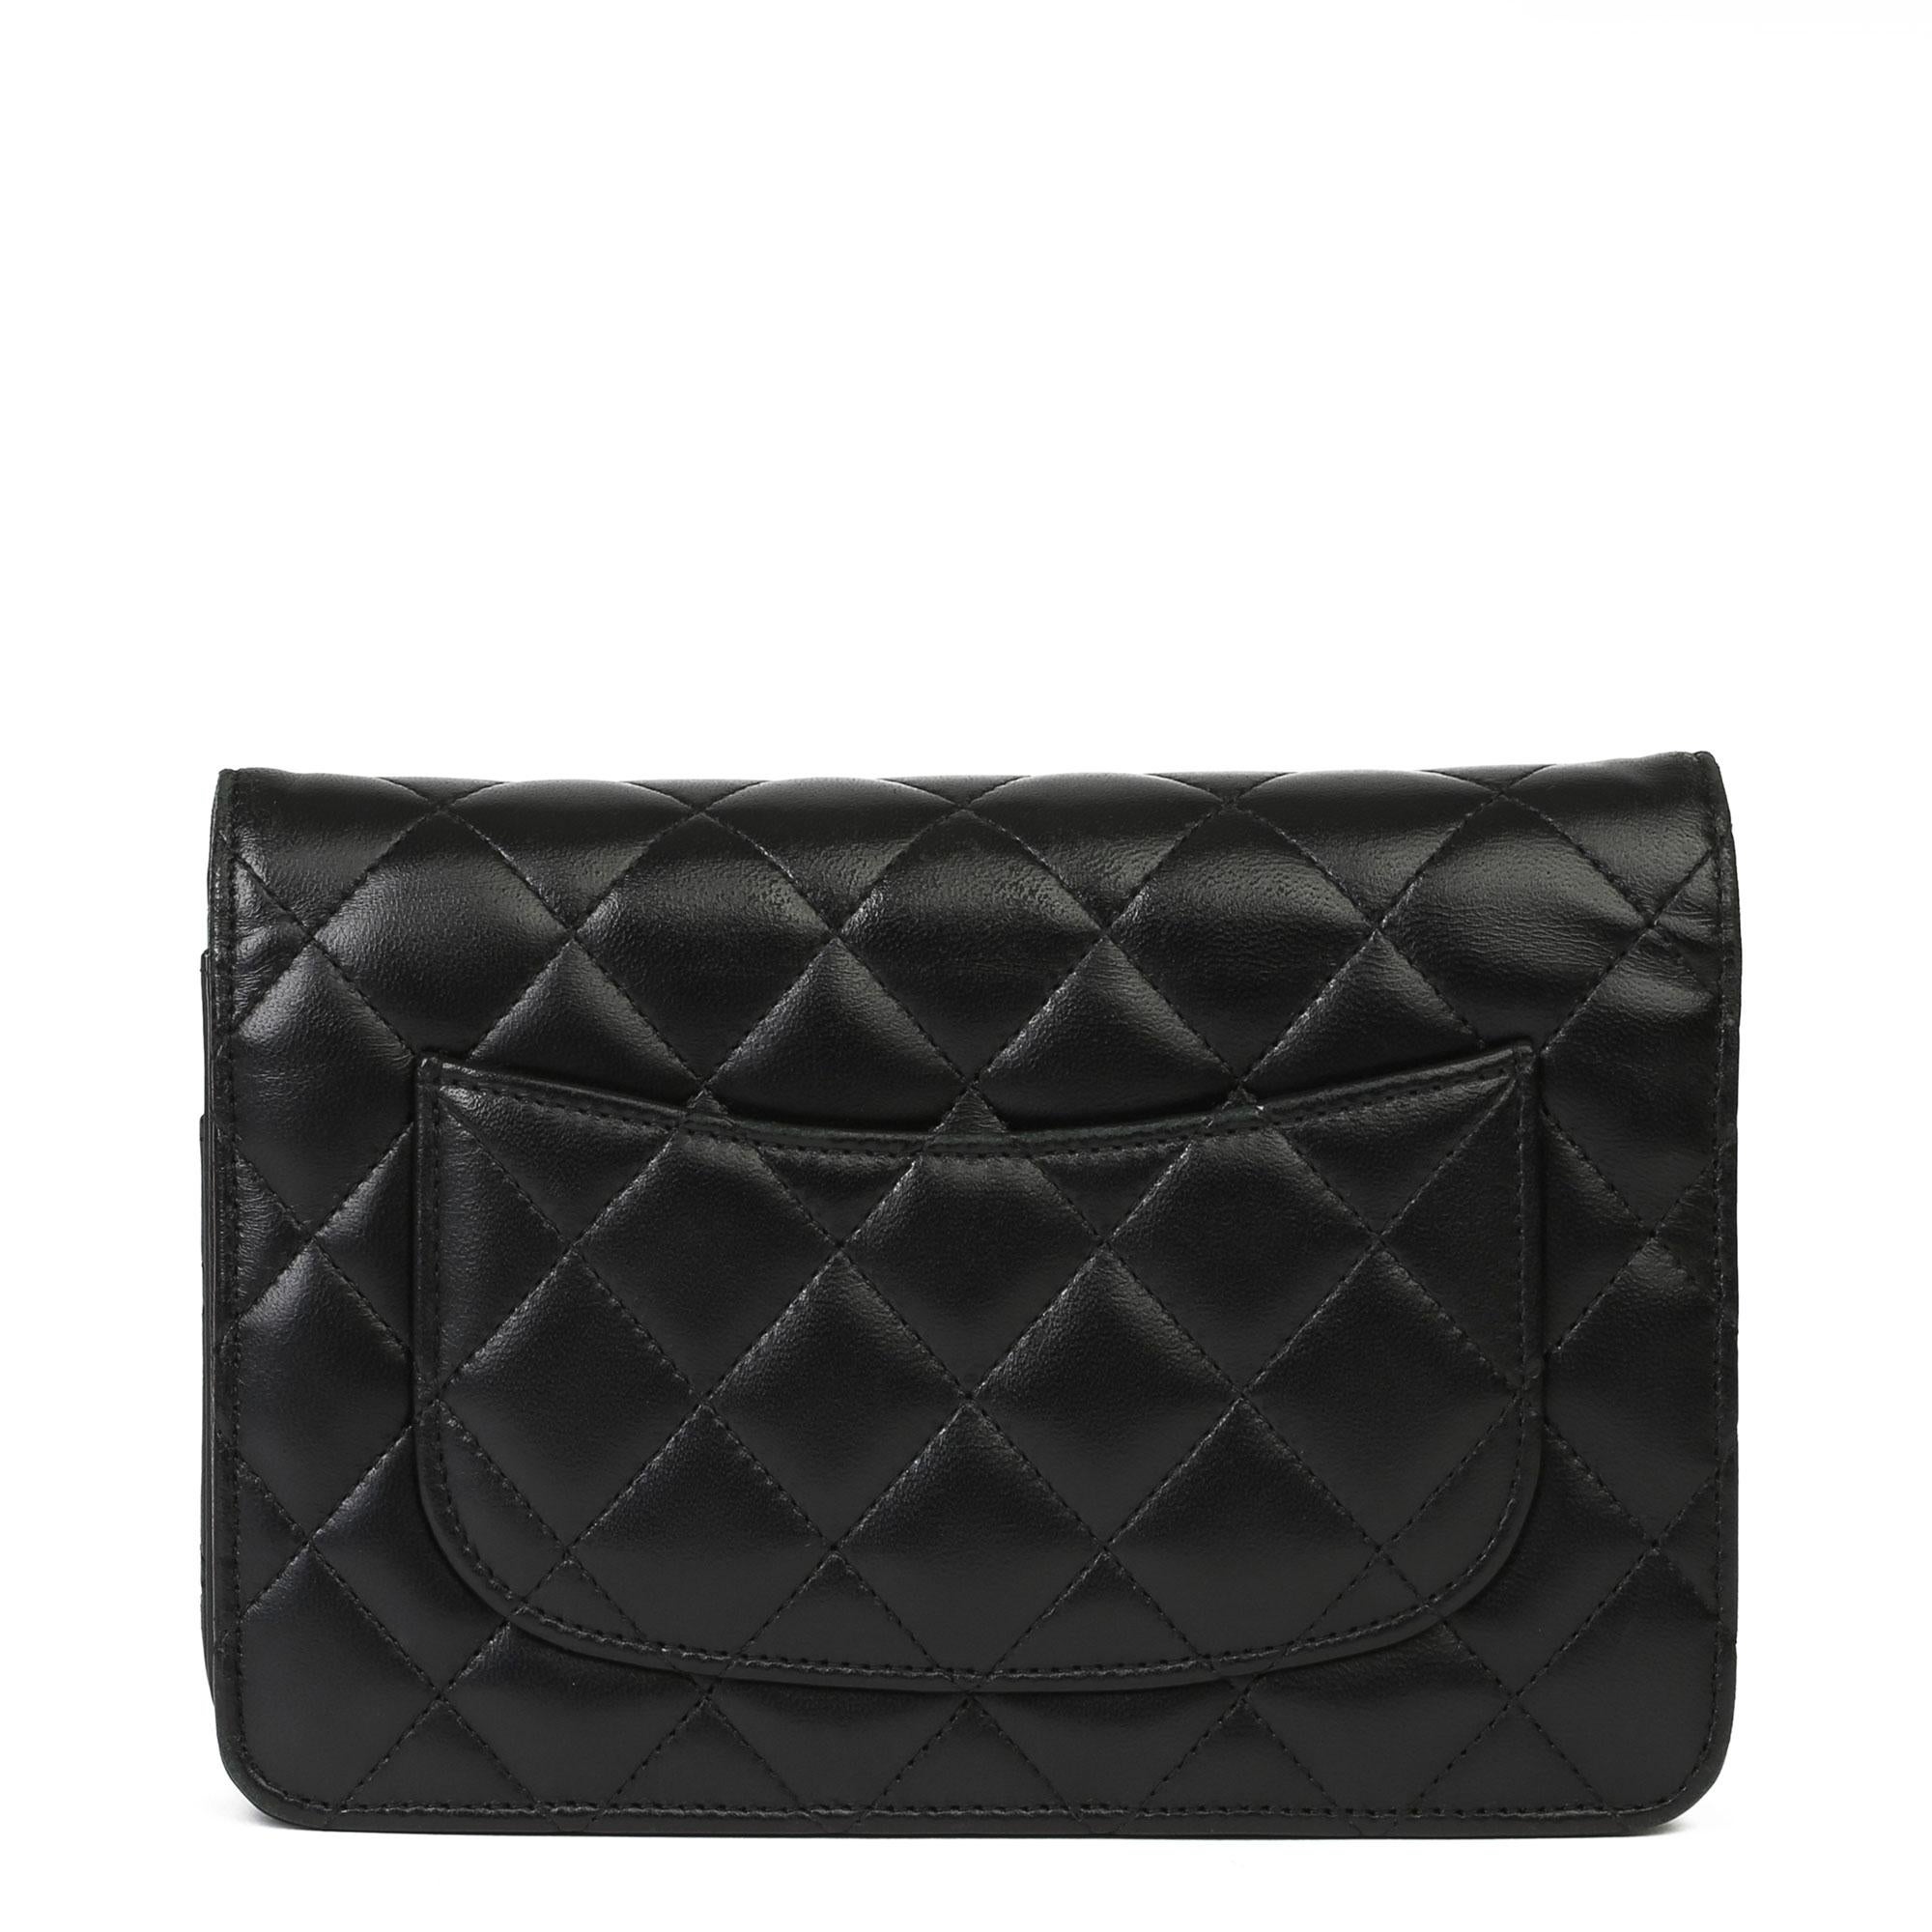 2017 Chanel Black Quilted Lambskin Wallet on Chain WOC 7